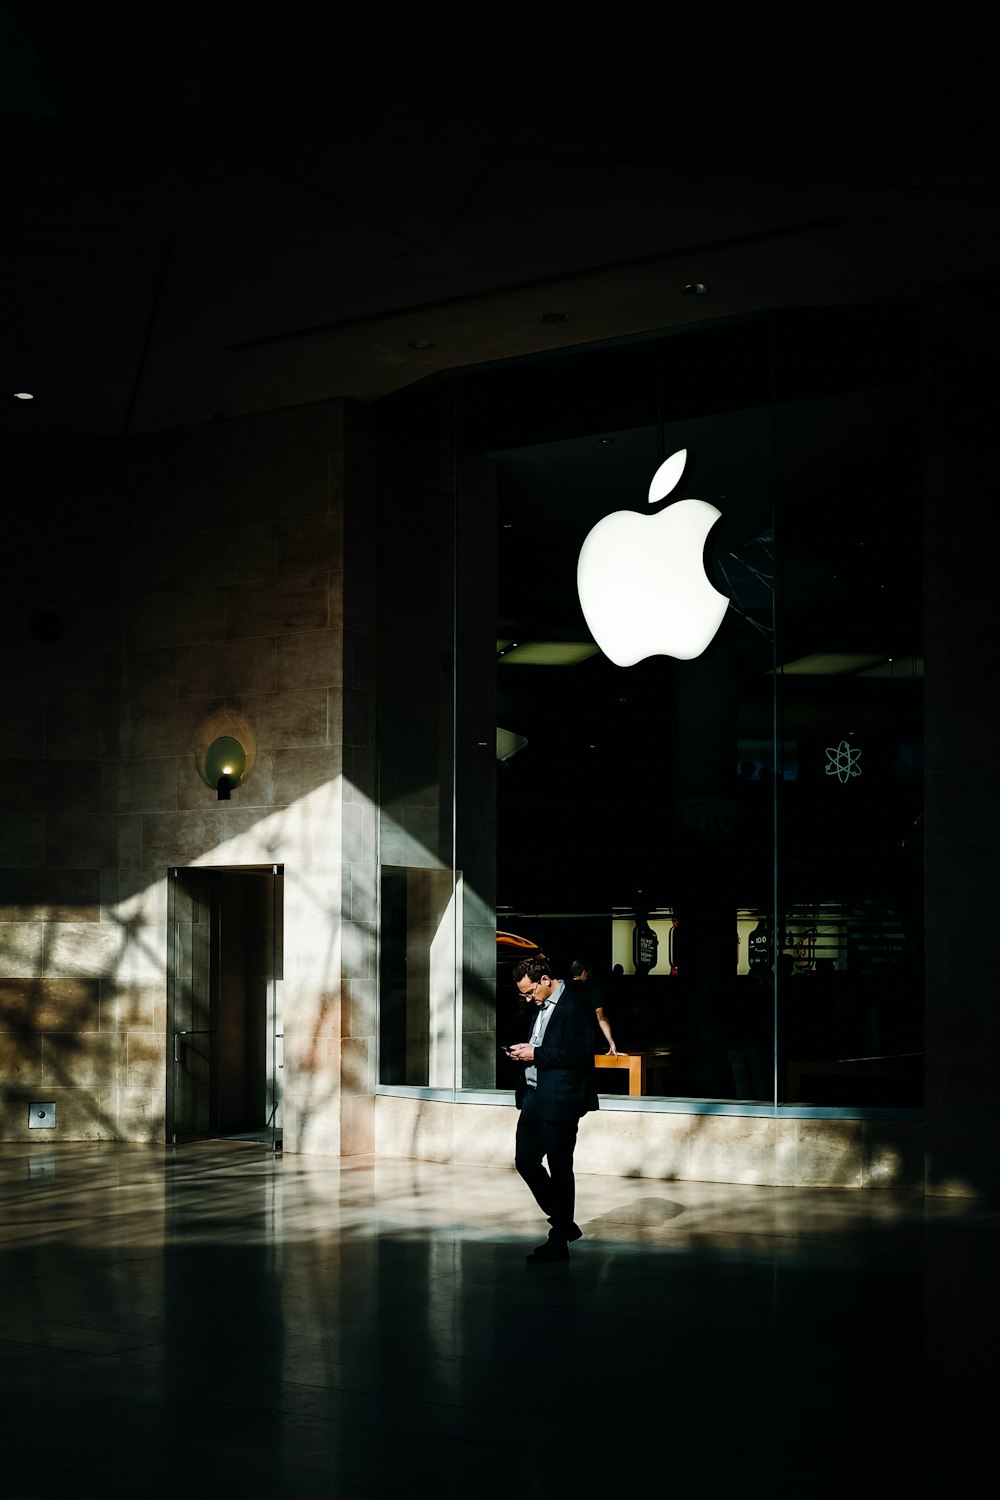 person standing in front of Apple emblem